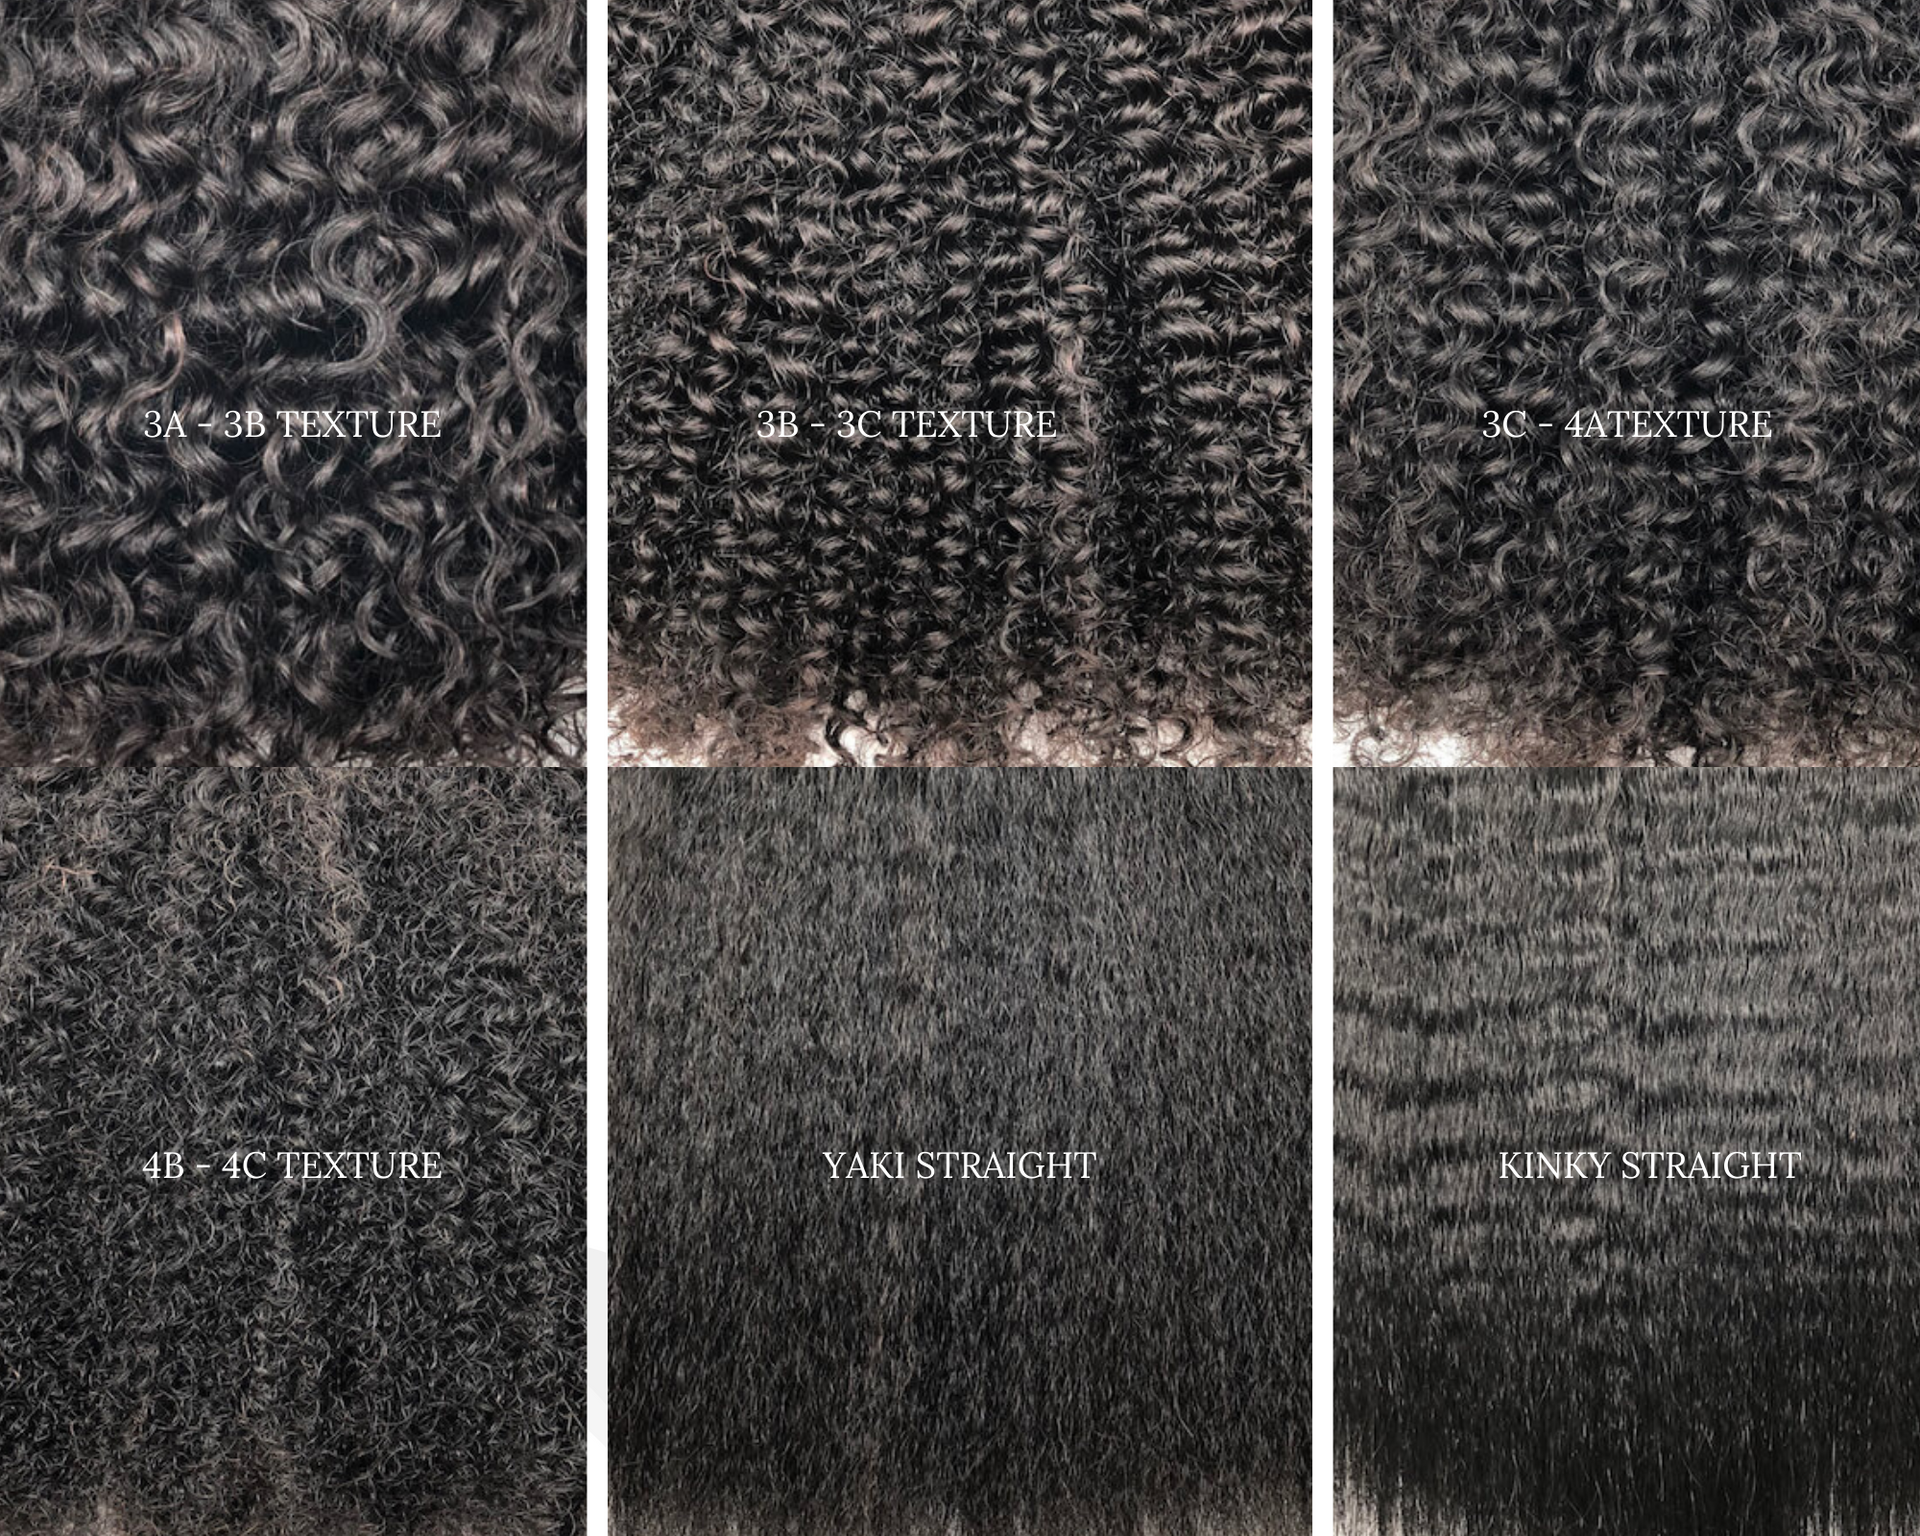 TEXTURED HAIR EXTENSIONS